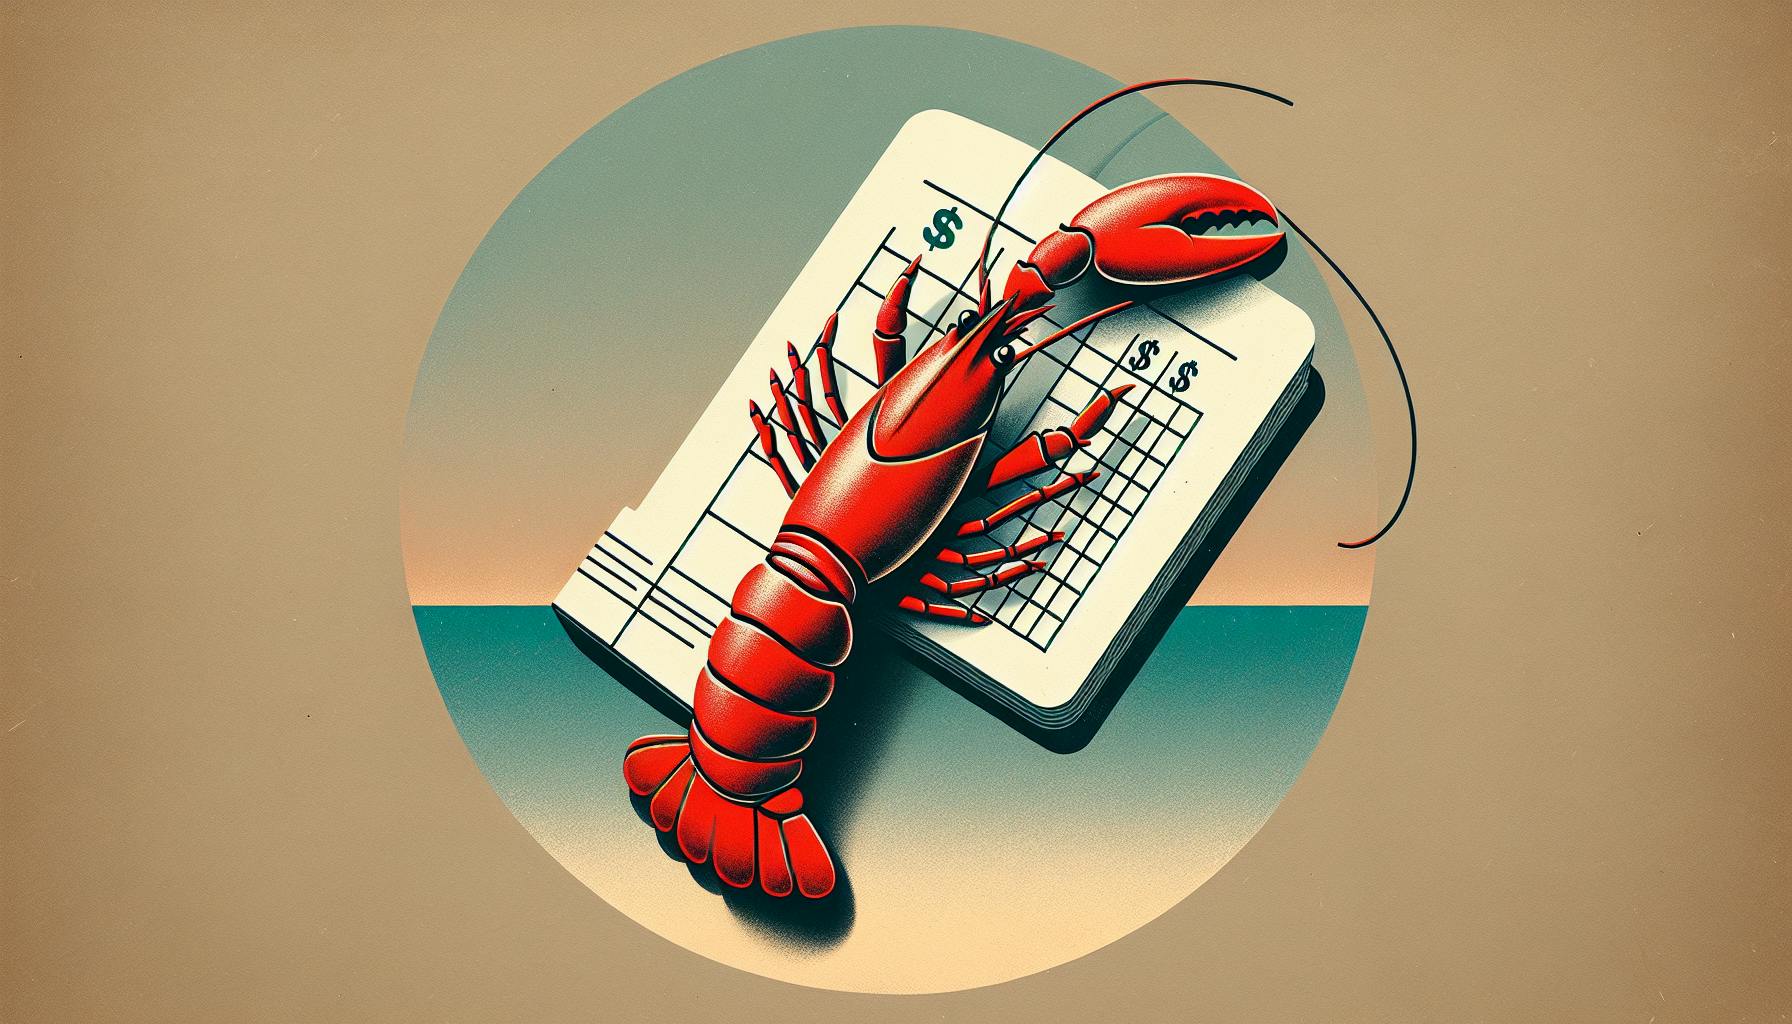 Accounting Salaries in Maine: Lobsters and Ledgers